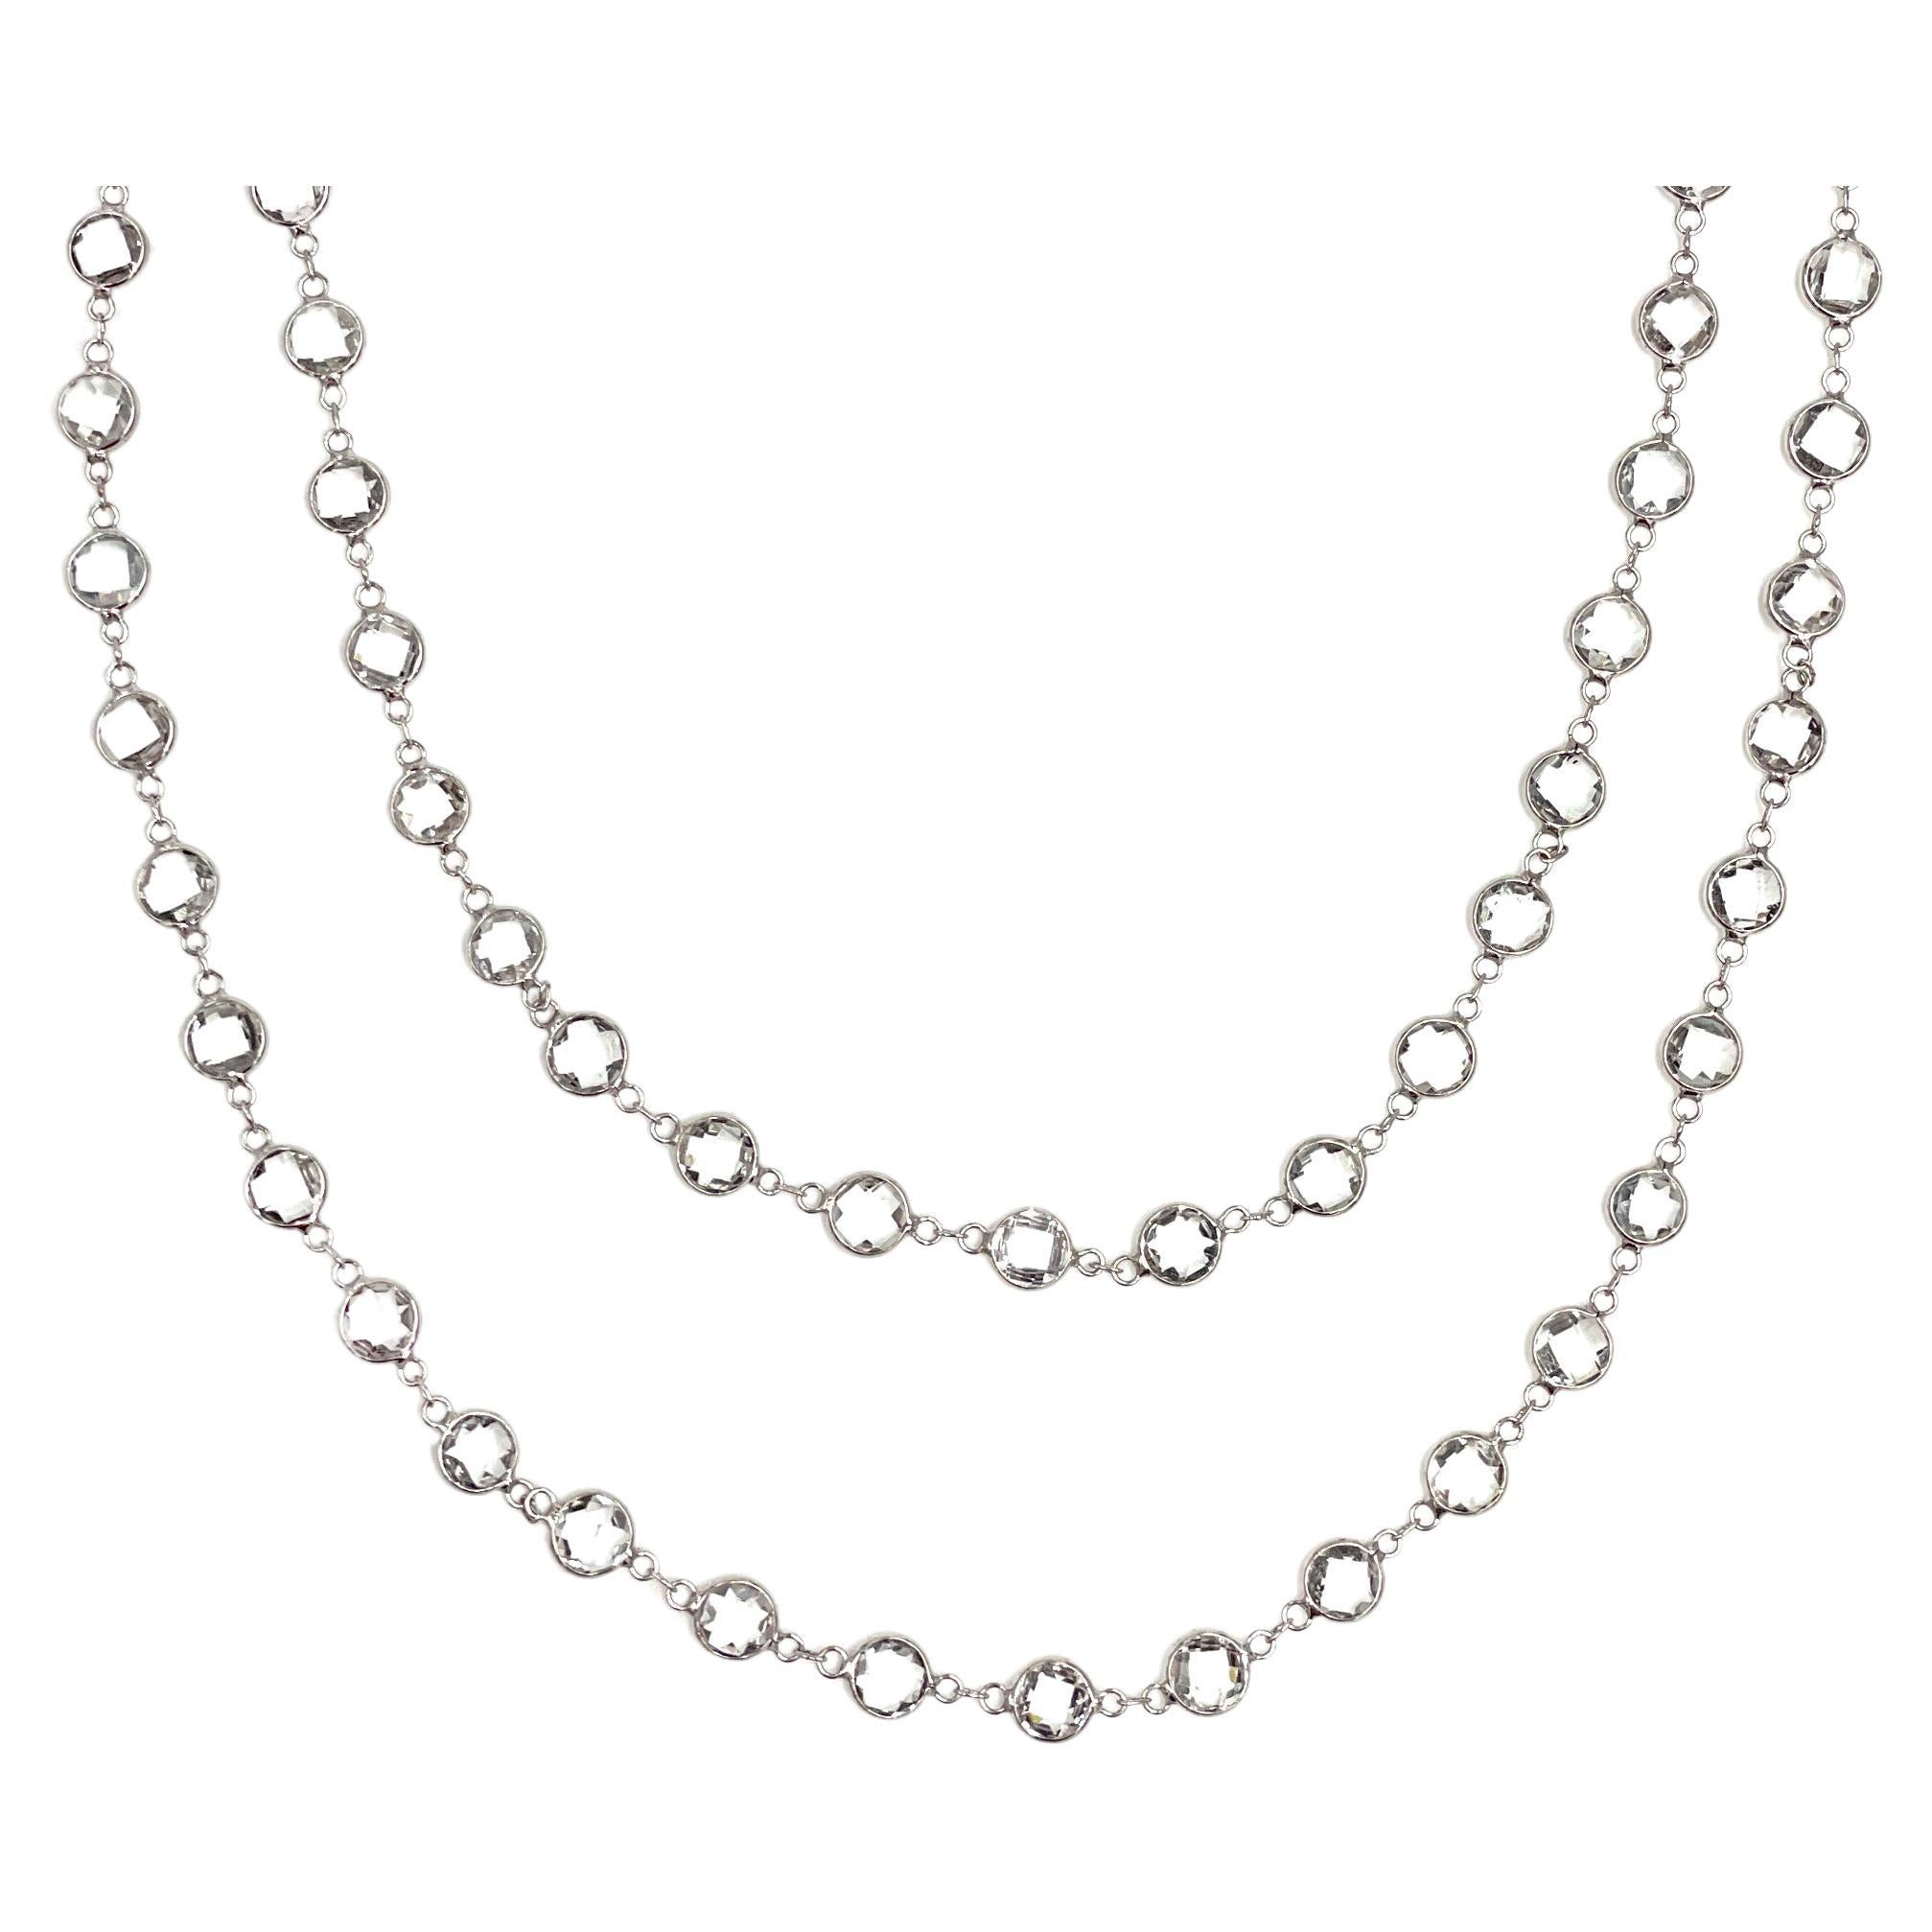 18k White Gold Long By The Yard Necklace with White Topaz